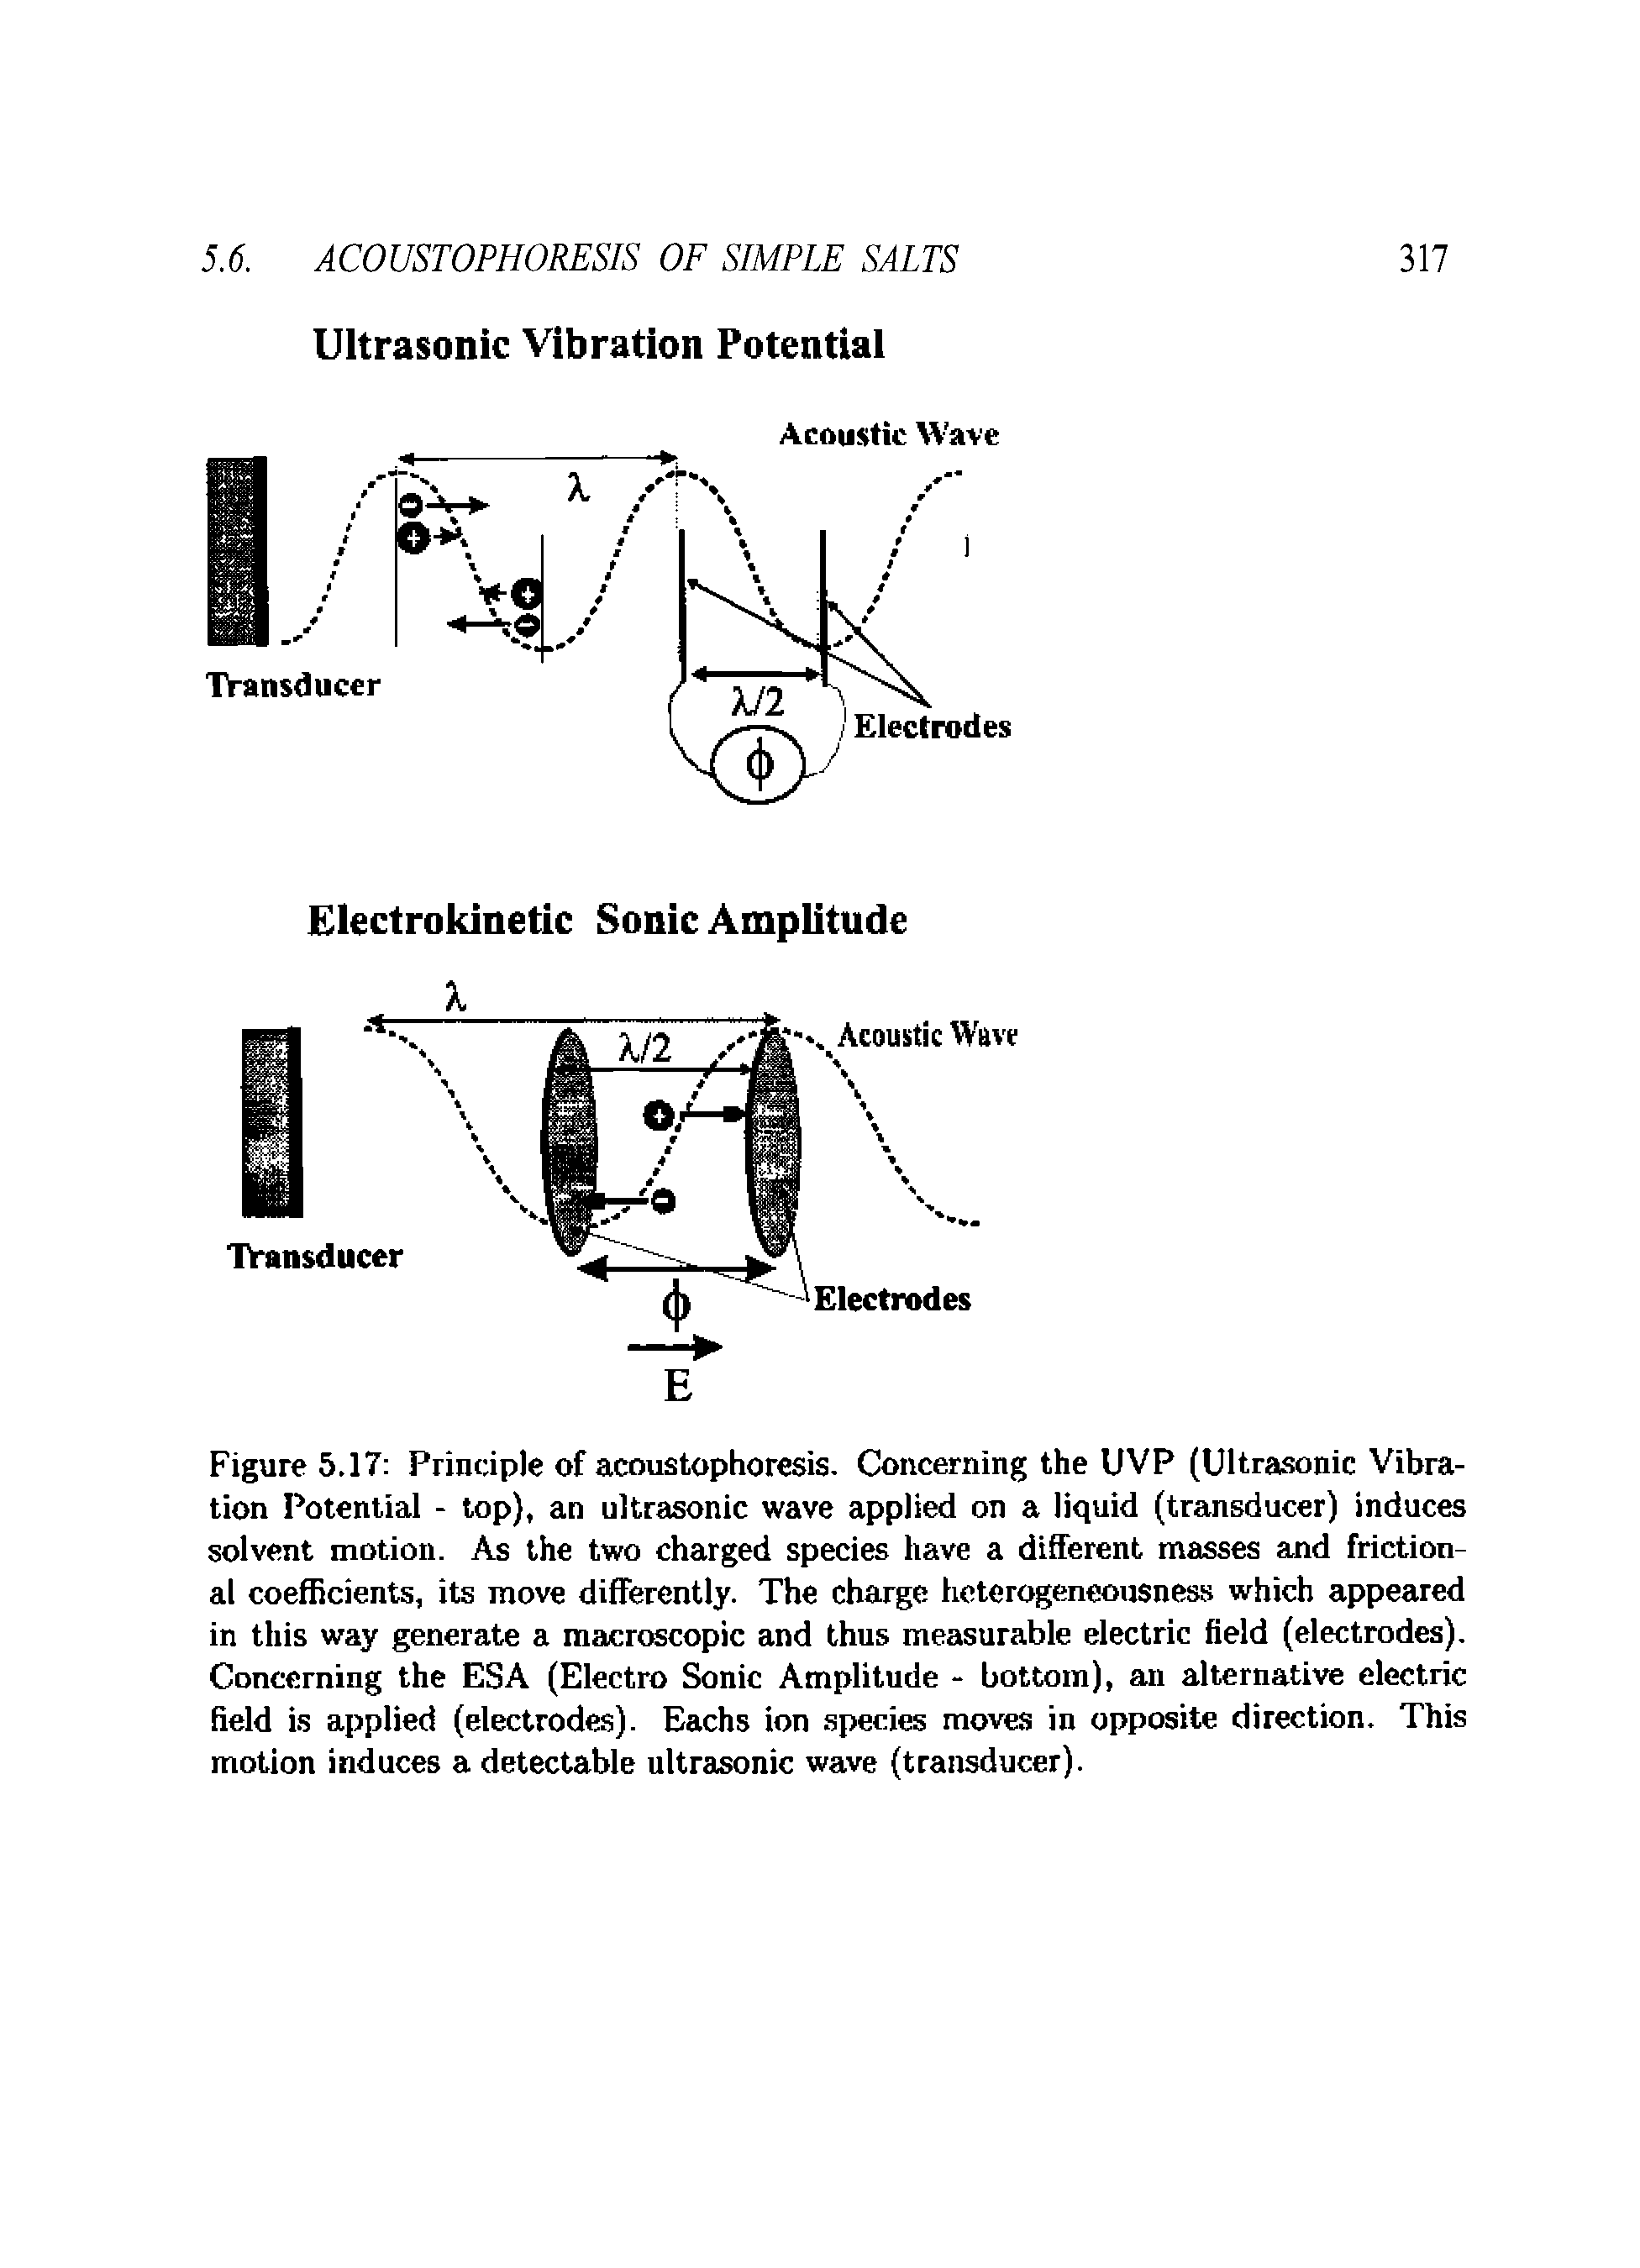 Figure 5.17 Principle of acoustophorcsis. Concerning the UVP (Ultrasonic Vibration Potential - top), an ultrasonic wave applied on a liquid (transducer) induces solvent motion. As the two charged species have a different masses and frictional coefficients, its move differently. The charge heterogeneonsness which appeared in this way generate a macrr opic and thus measurable electric field (electrodes). Concerning the ESA (Electro Sonic Amplitude - bottom), an alternative electric field is applied (electrodes). Eachs ion species moves in opposite direction. This motion induces a detectable ultrasonic wave (transducer).